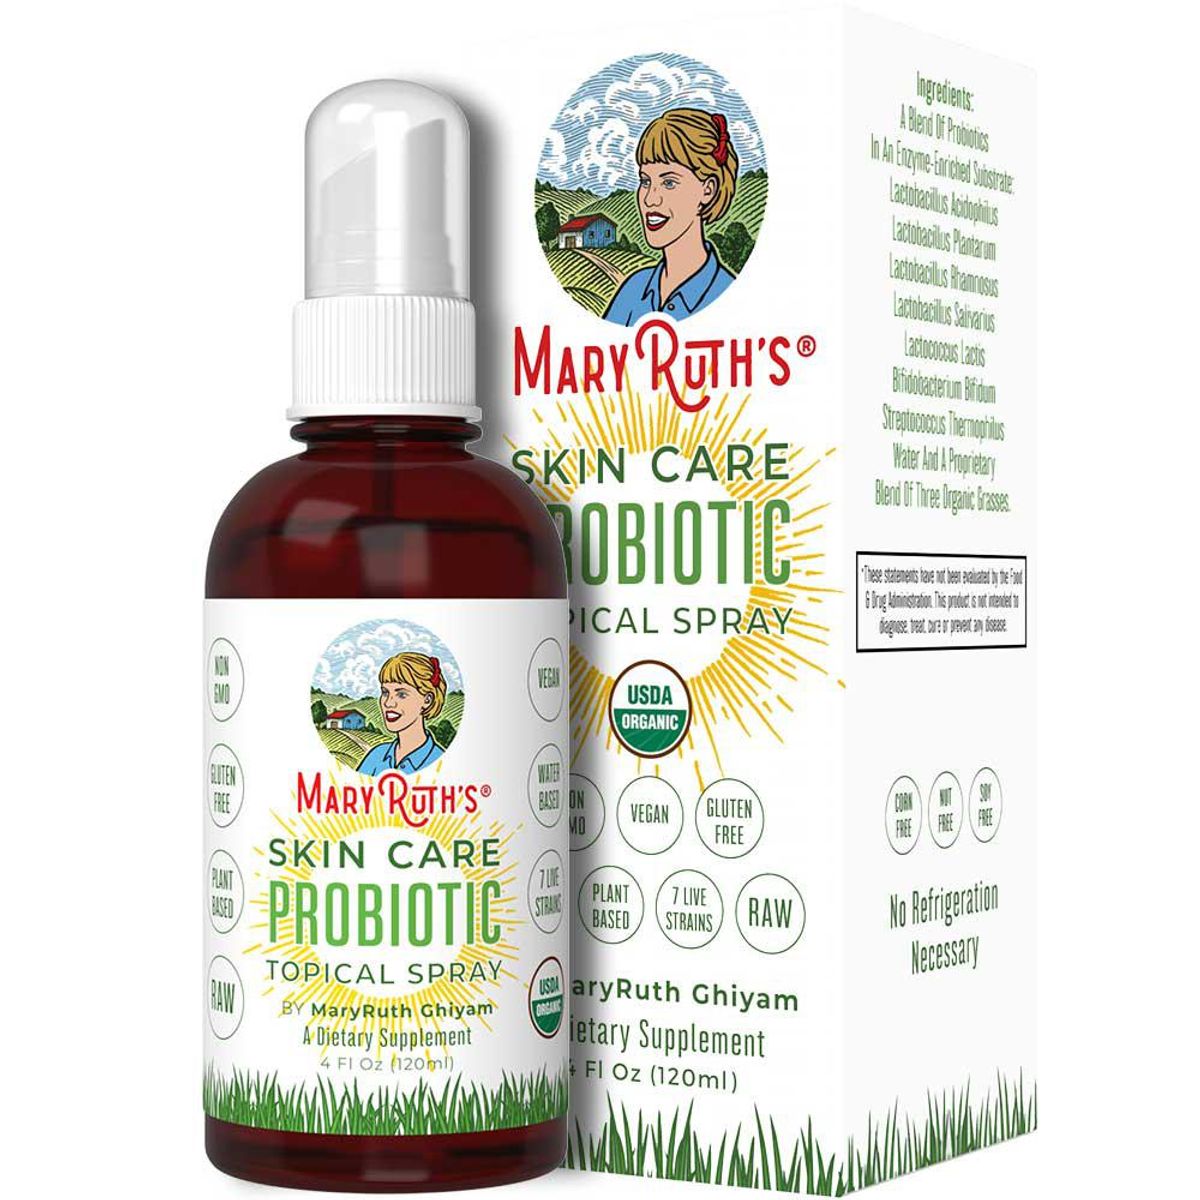 mary ruths skincare probiotic topical spray